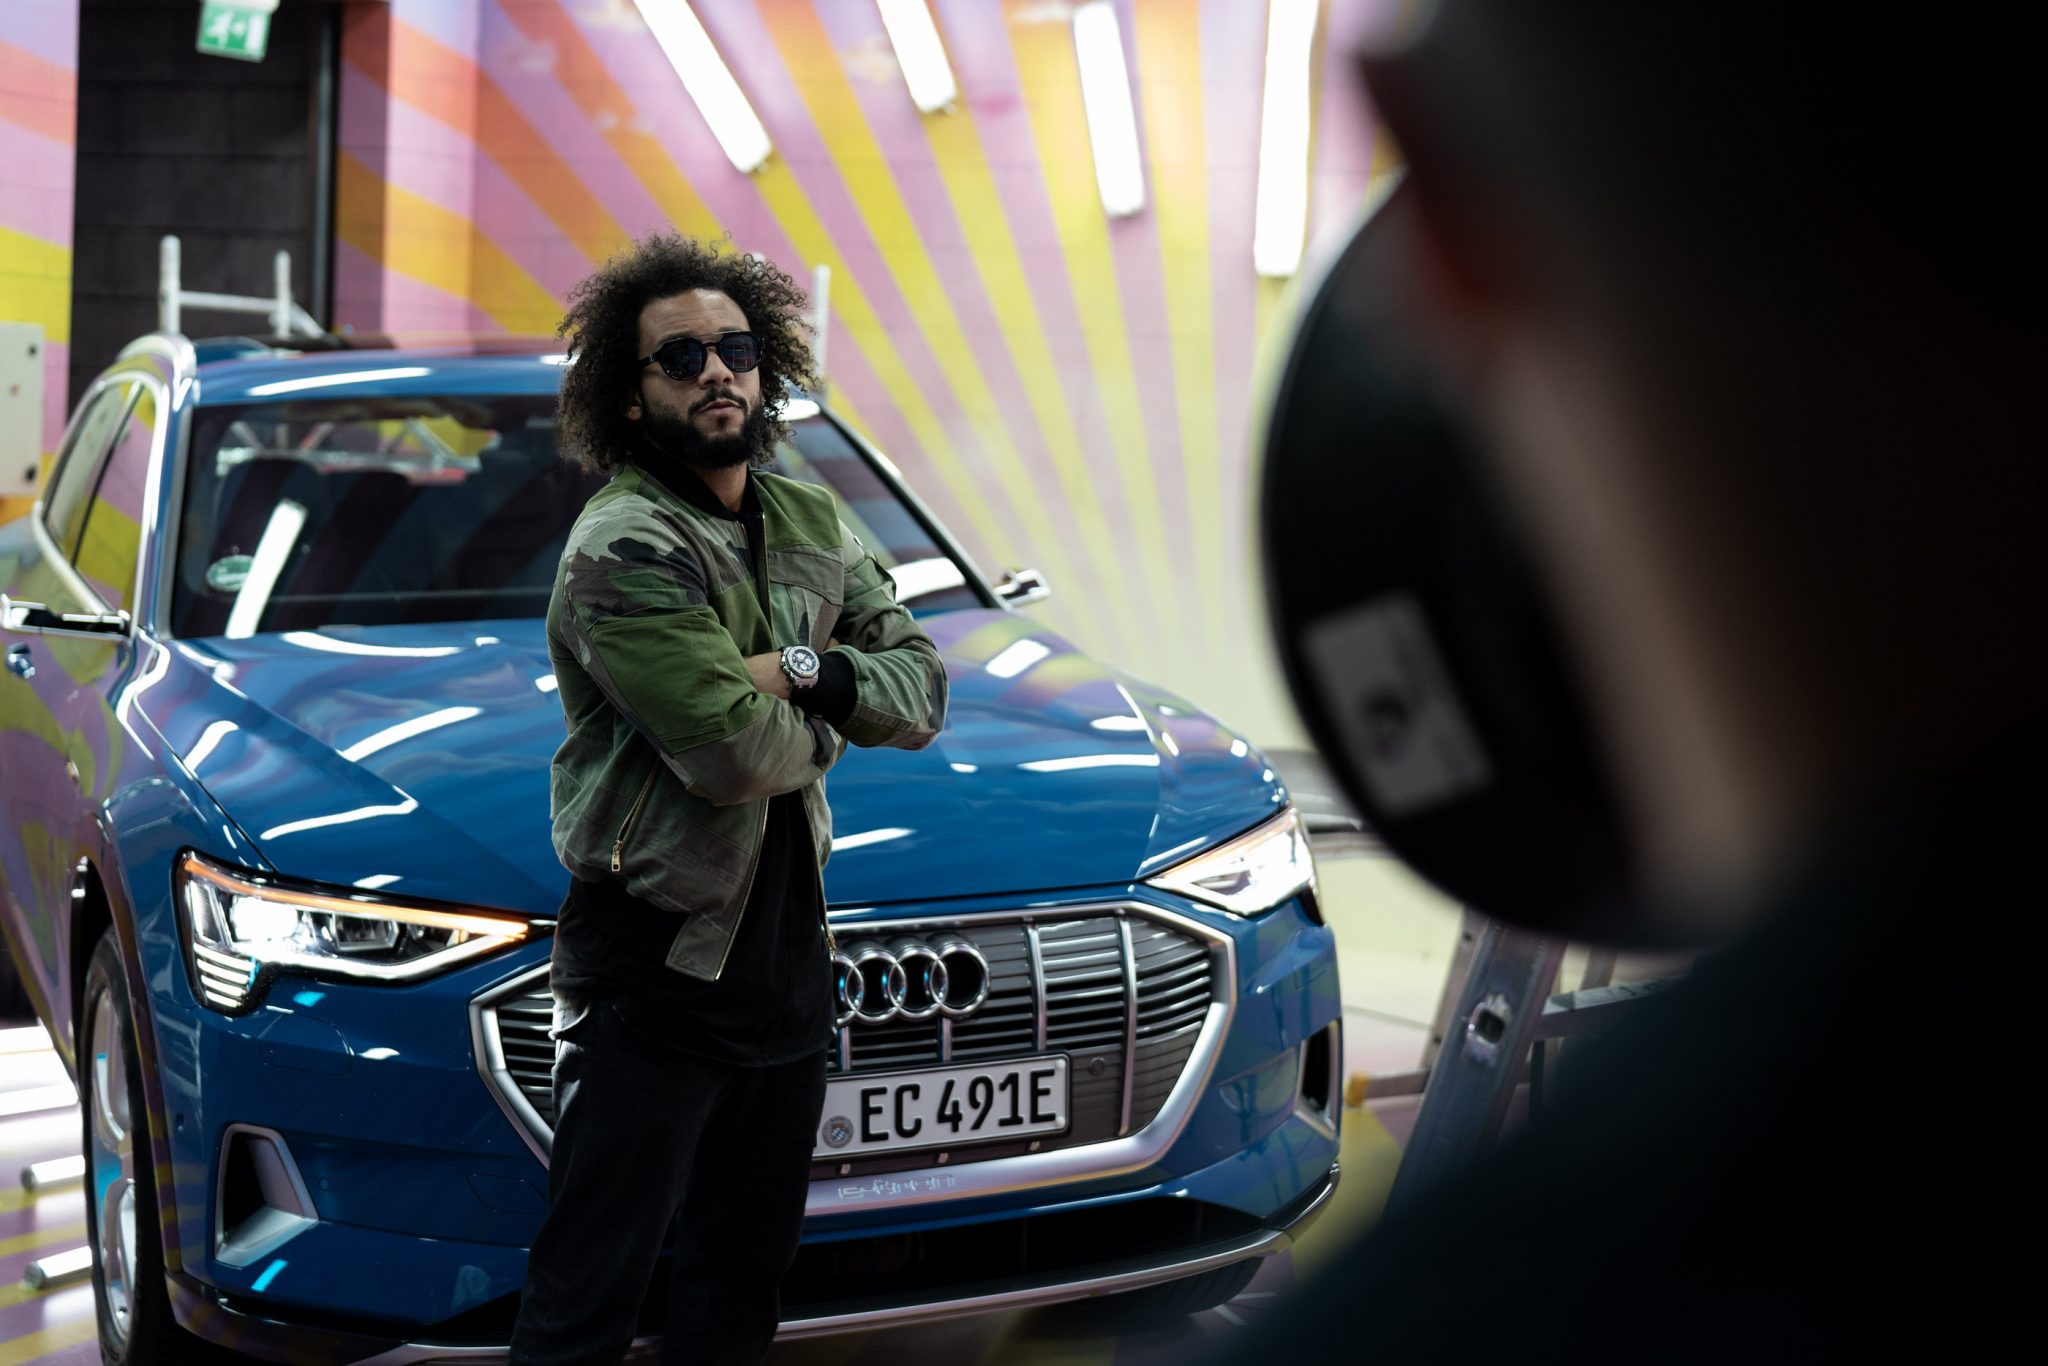 David LaChapelle | Audi x Real Madrid | Behind-the-scenes photographs from the Audi E-tron launch shoot in Madrid. | 19